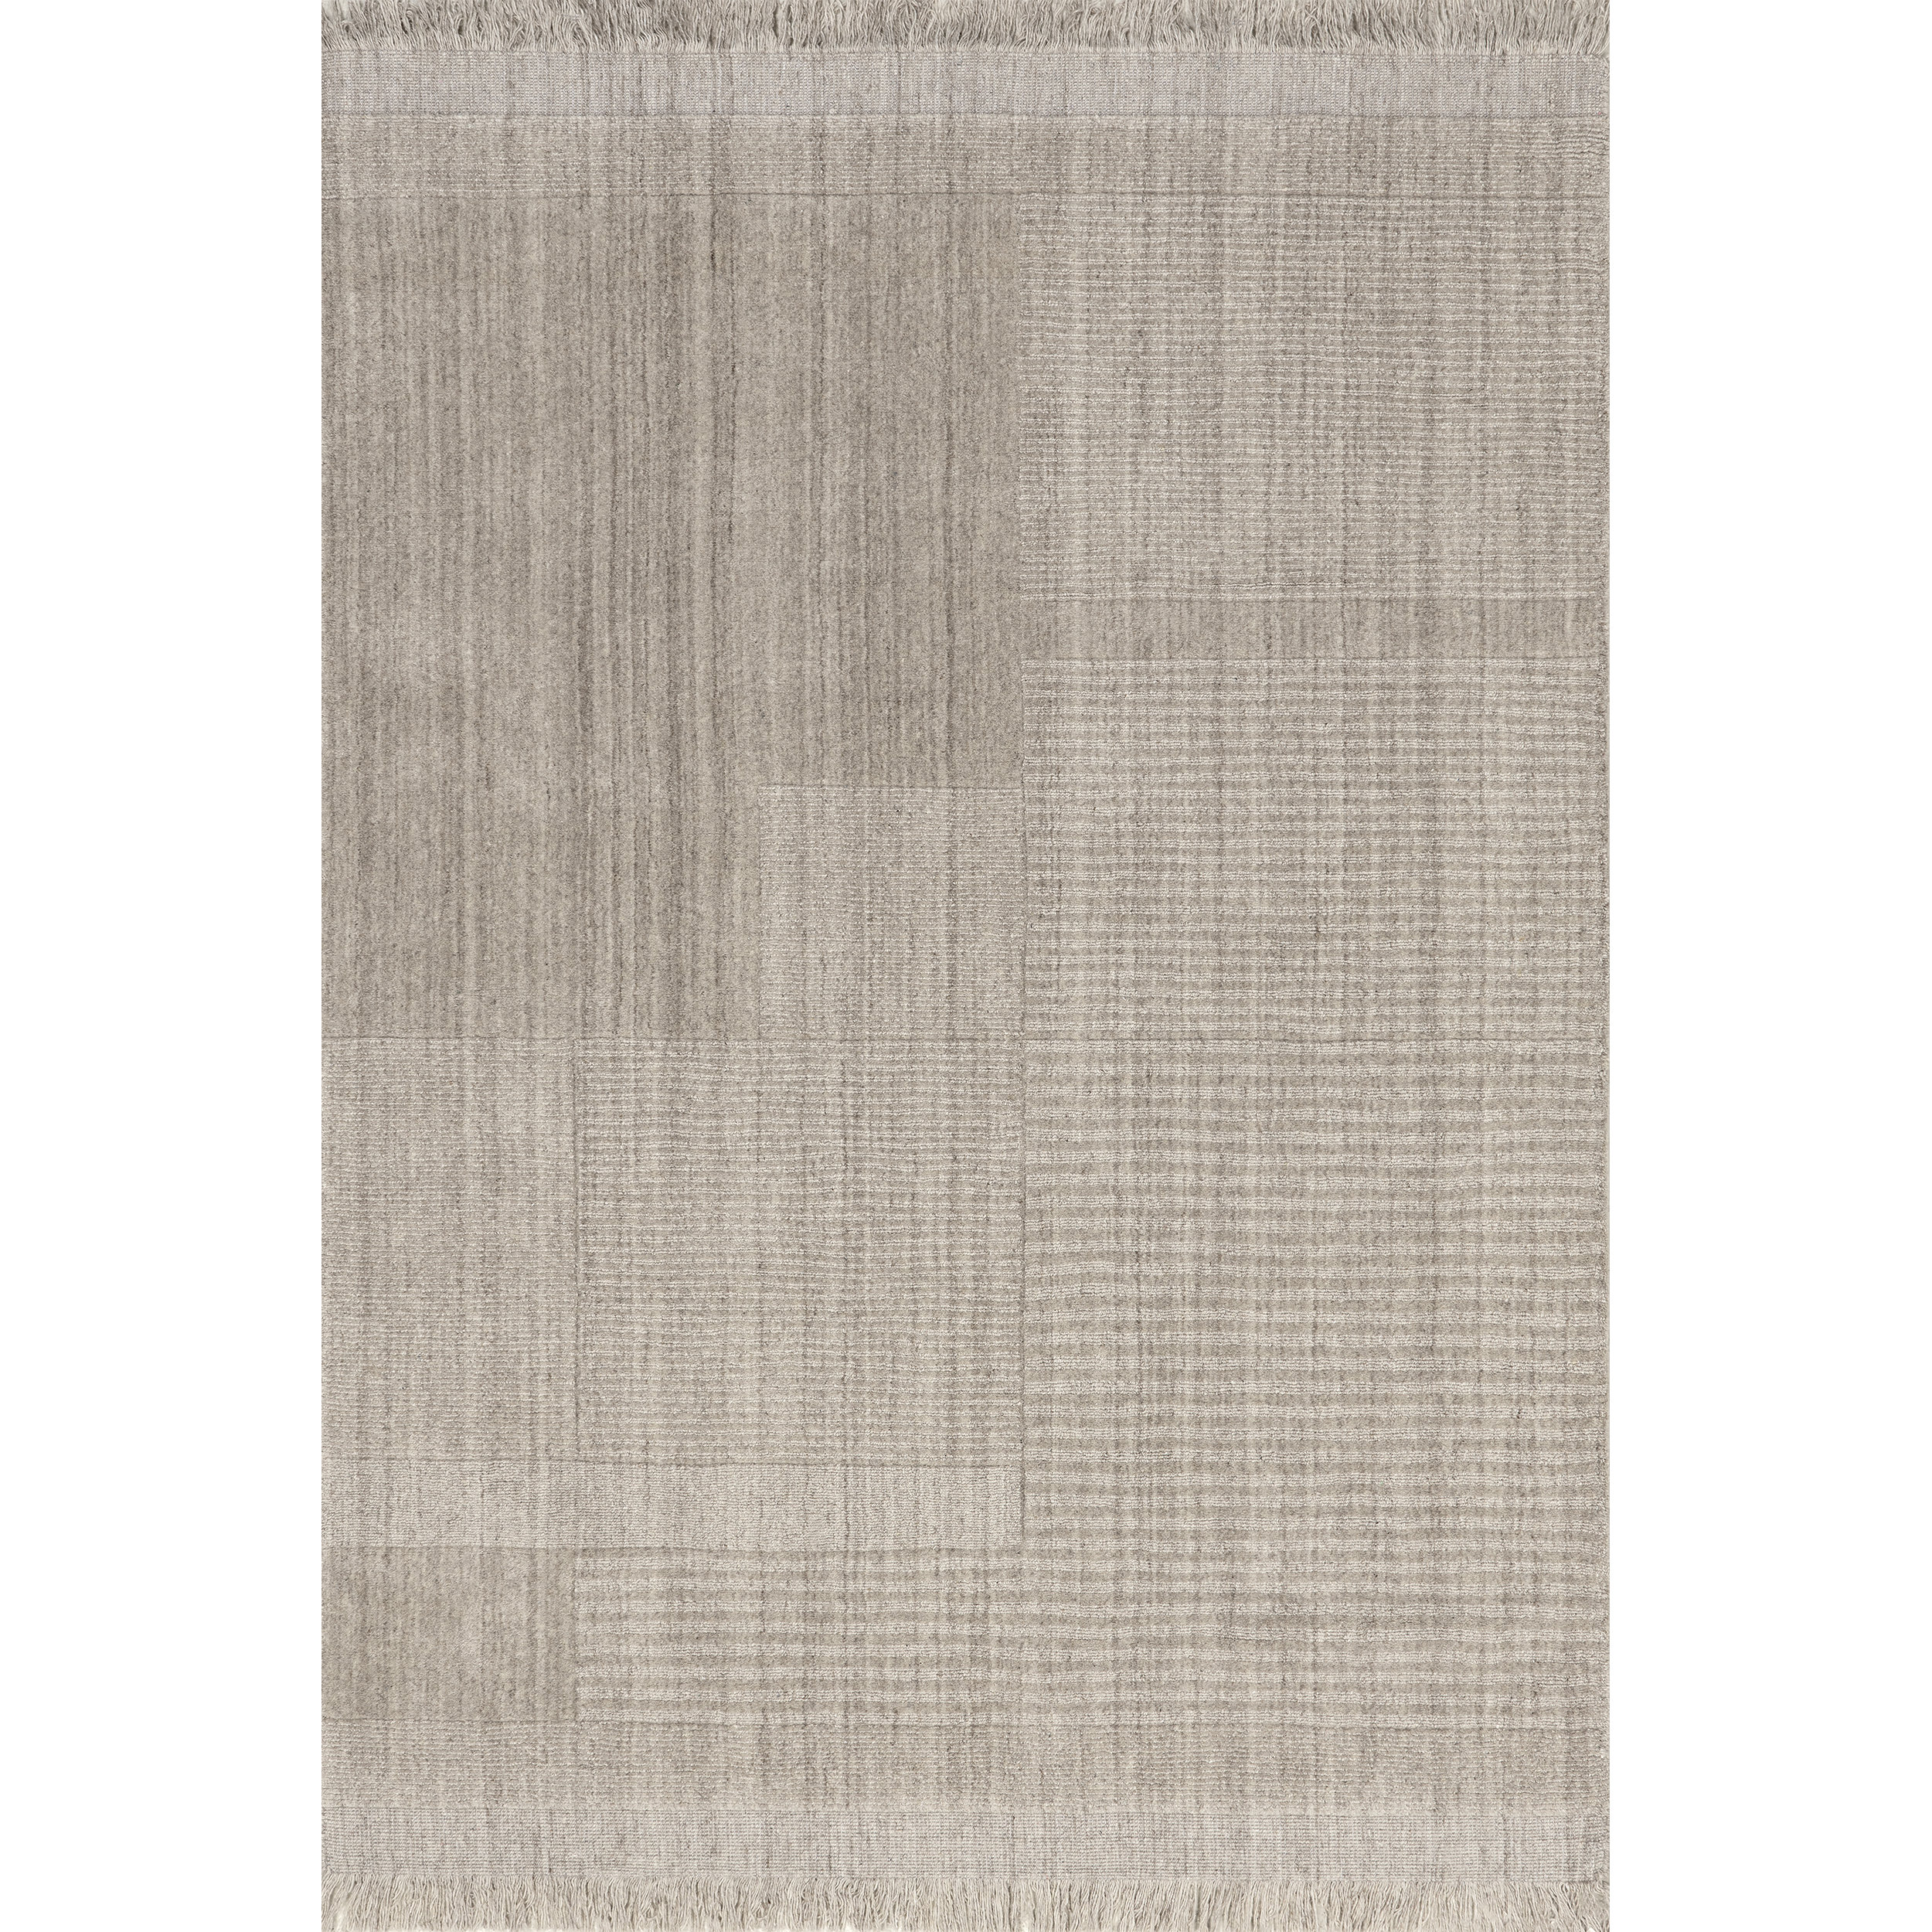 Arvin Olano x Rugs USA Mozai Fringed Wool-Blend Area Rug